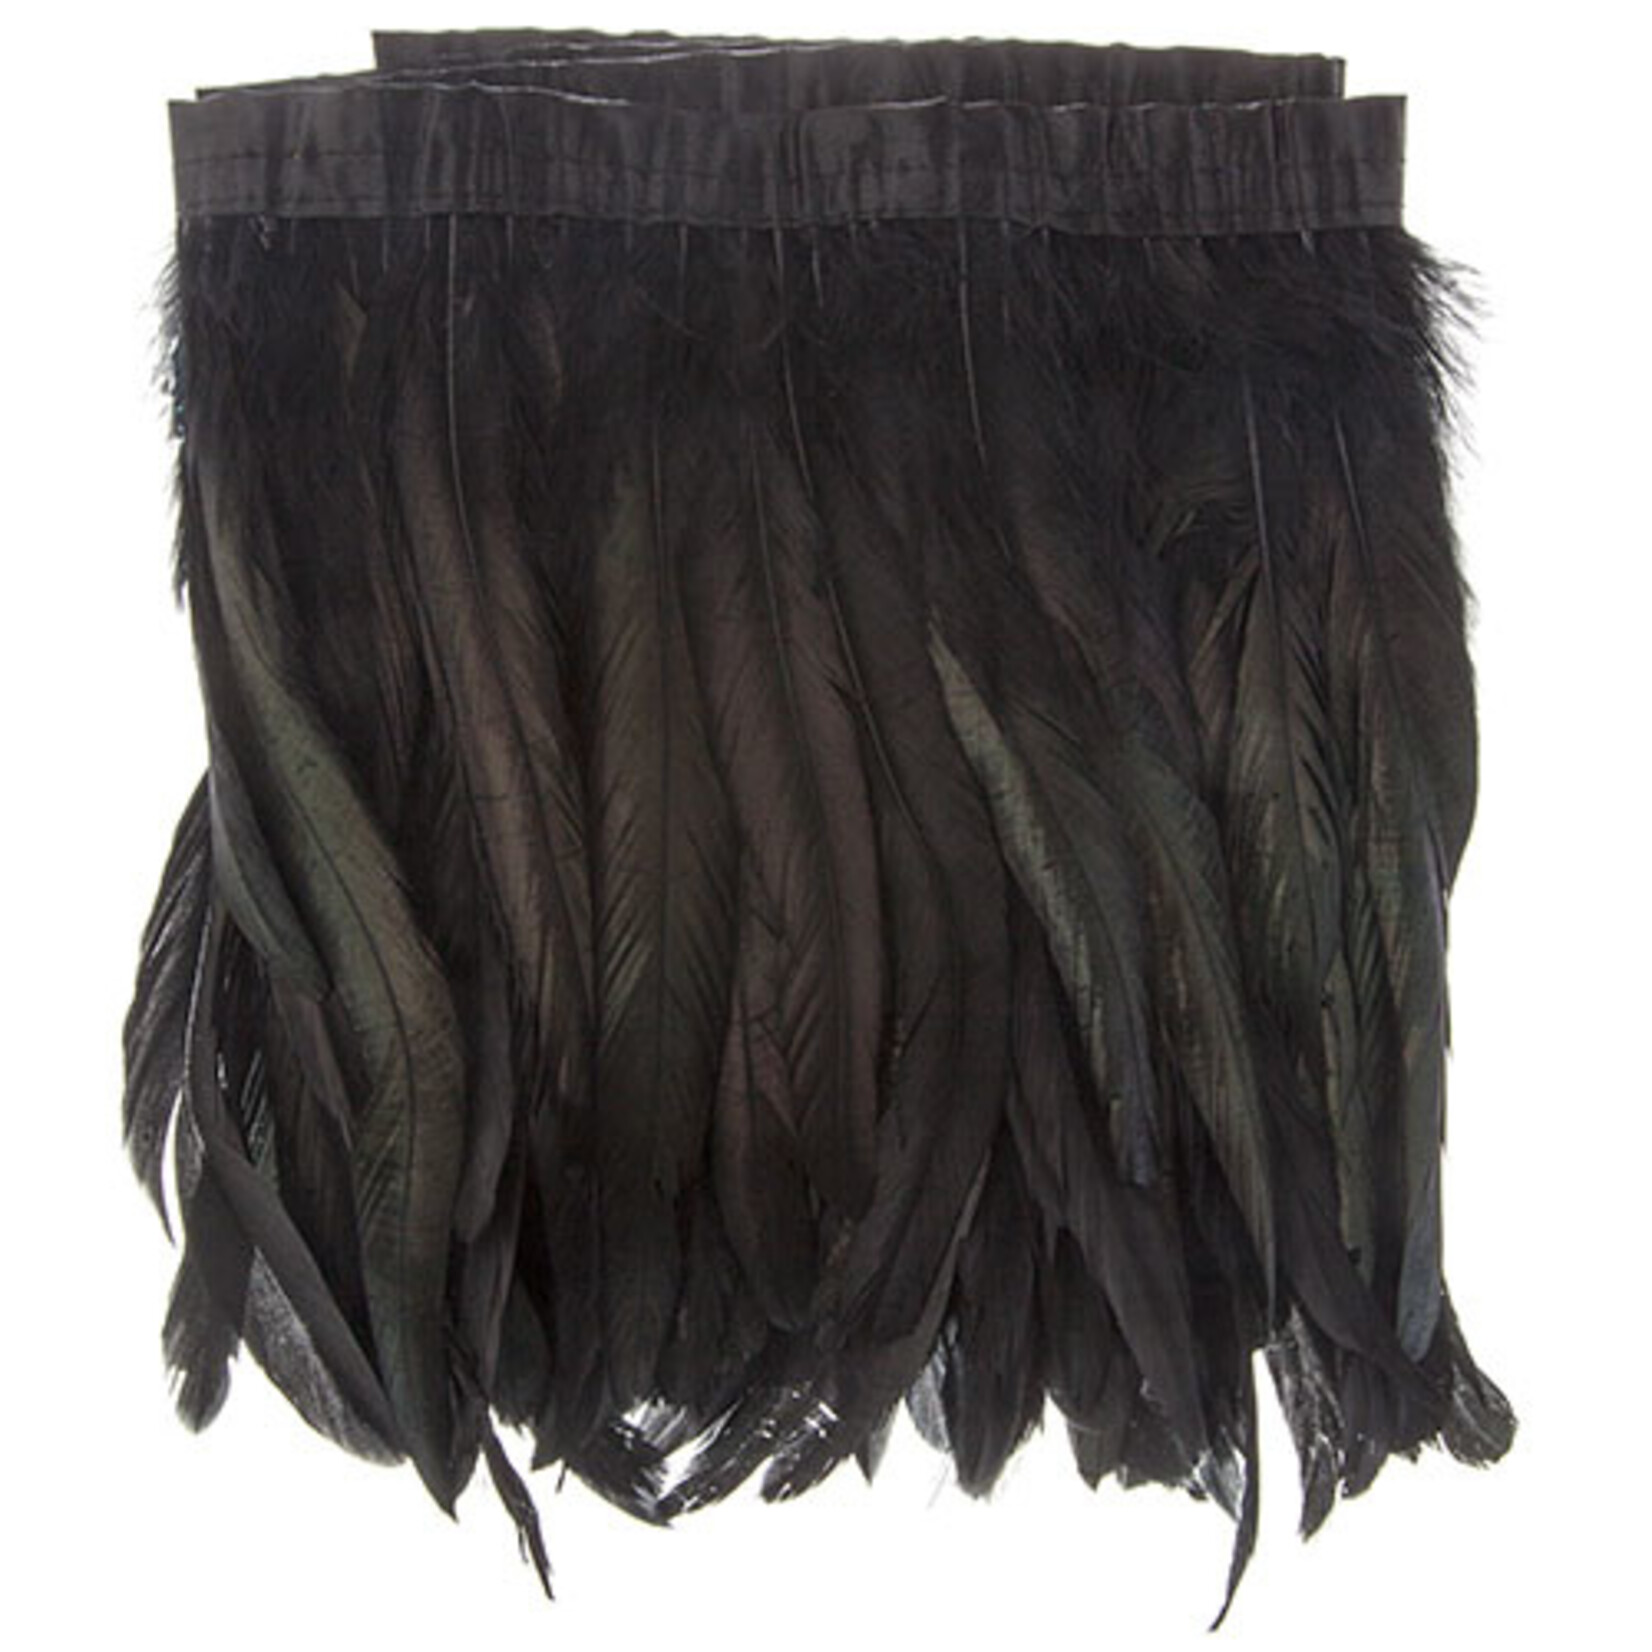 Coque Feathers Value 10-12 Inches 1 Yard  Black